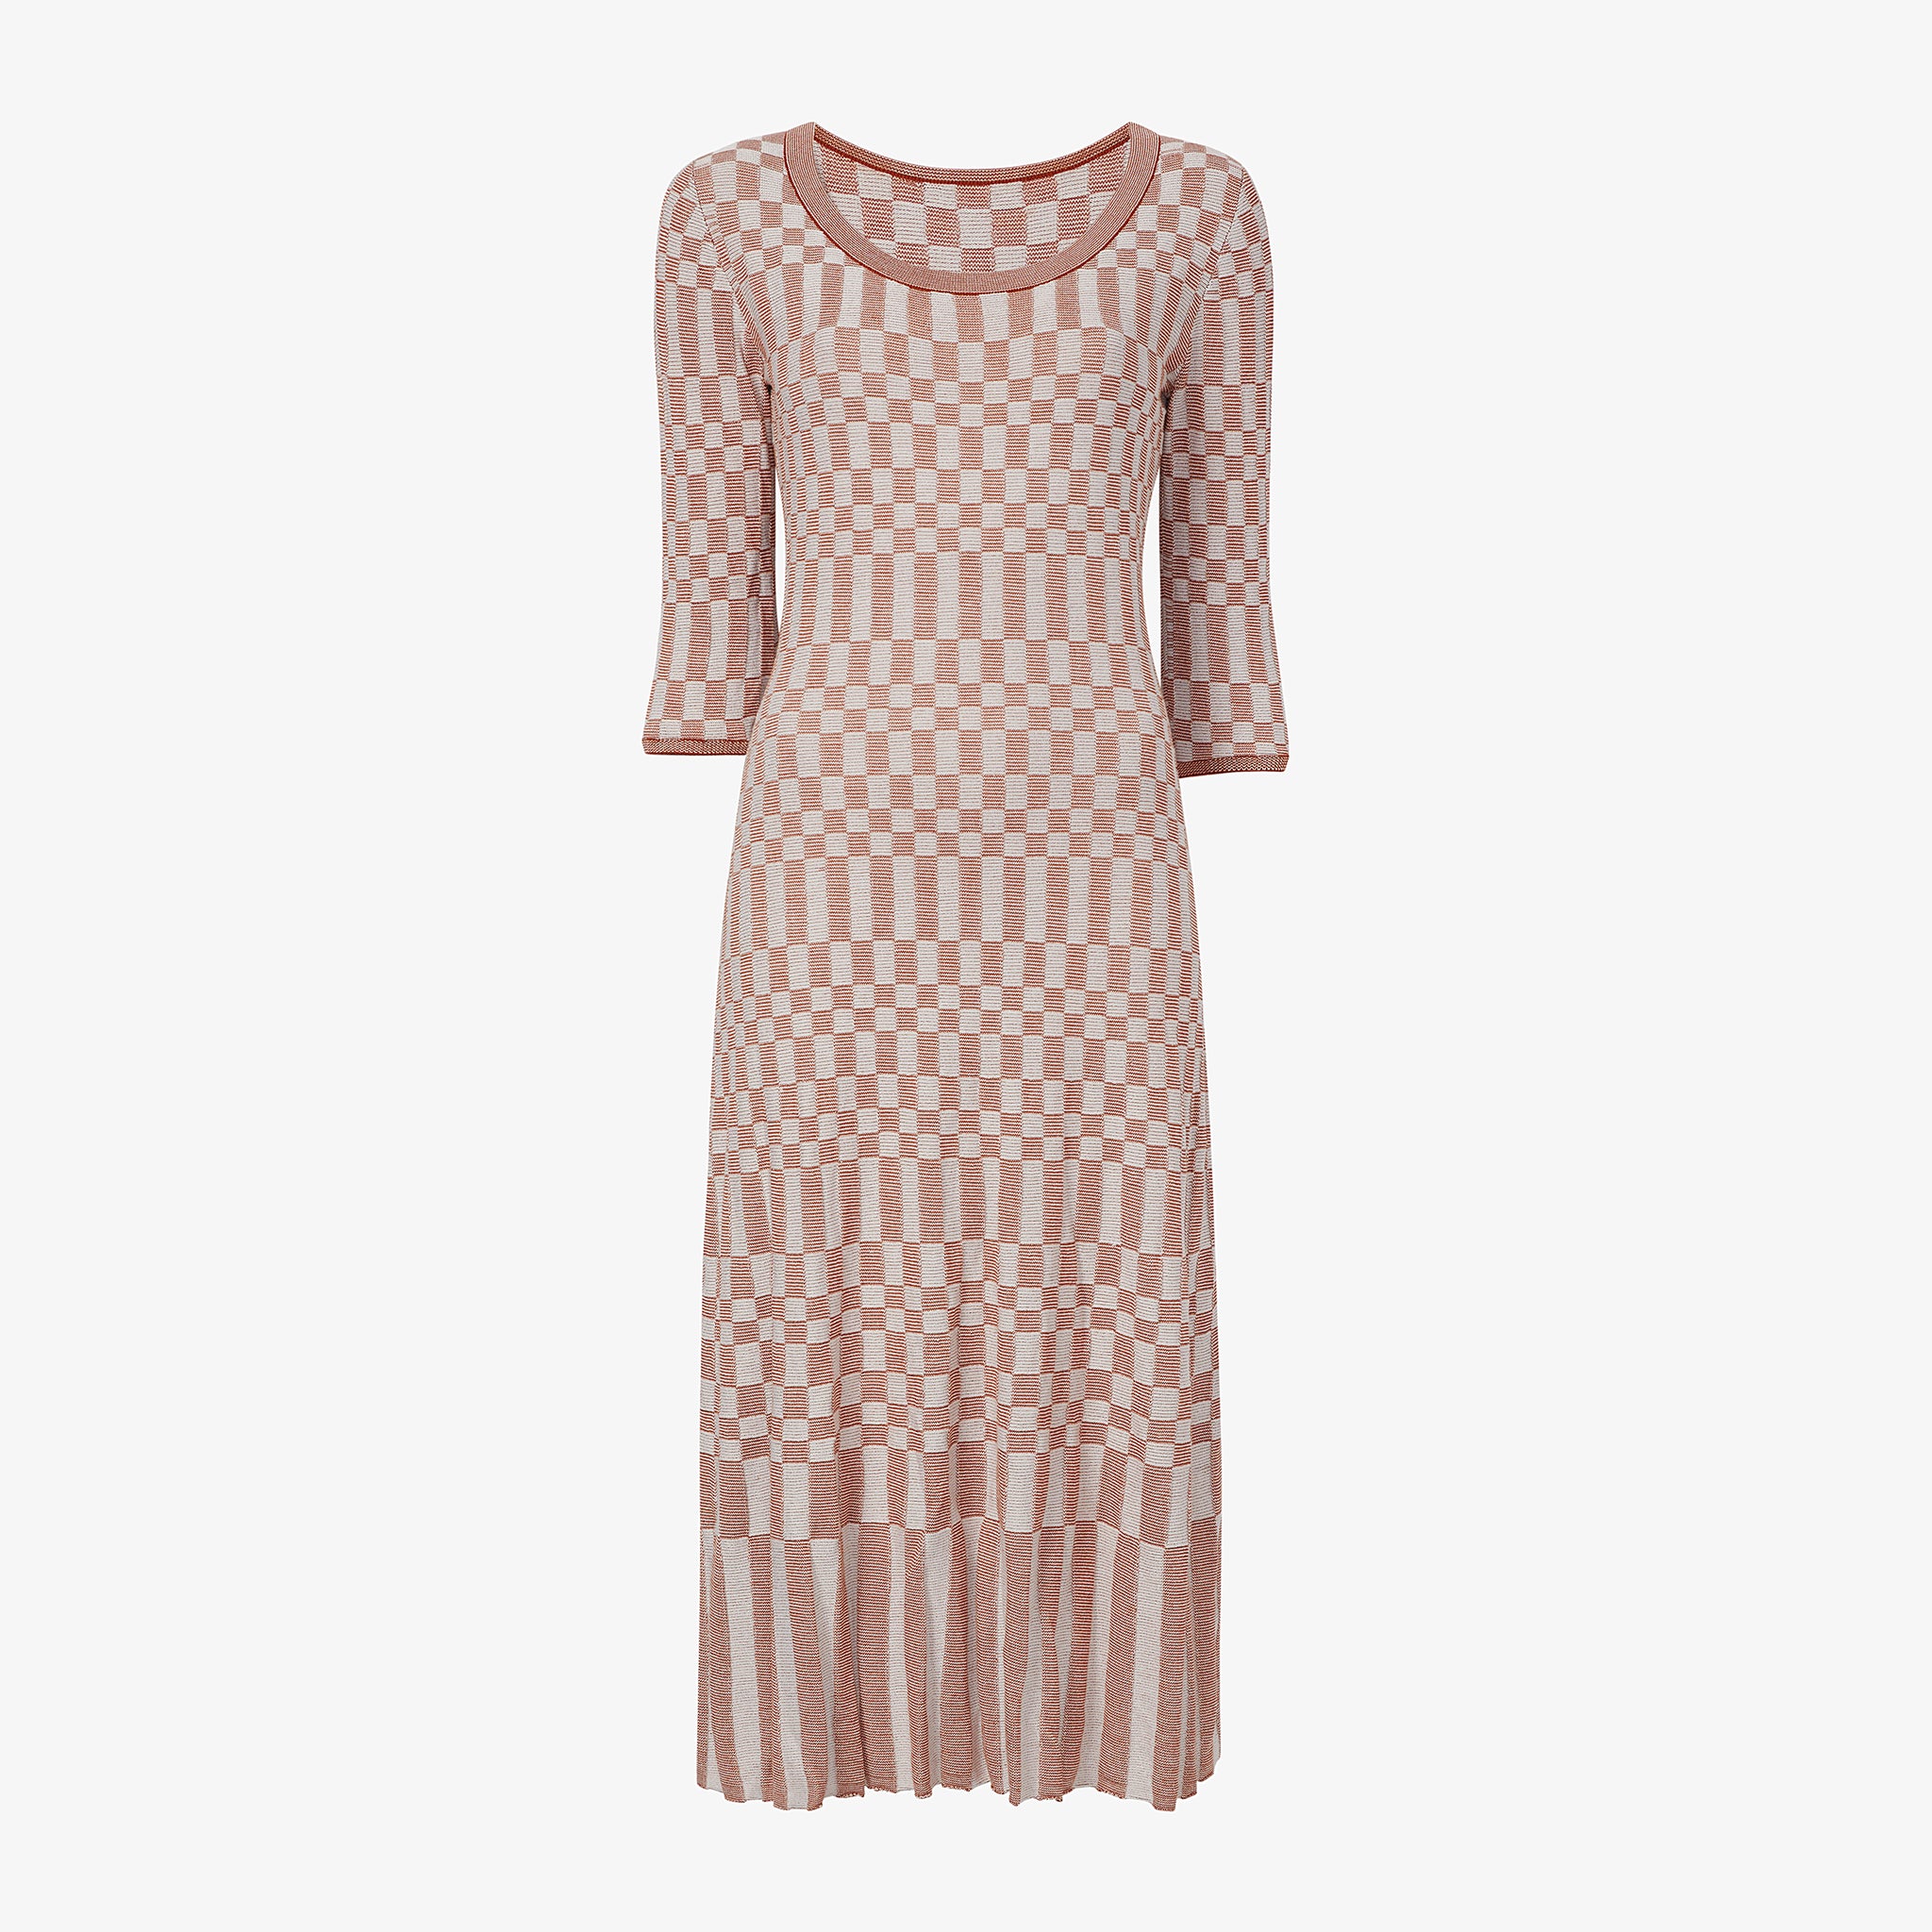 Packshot image of the Tippy Dress - Checkered Knit in Red Clay / Natural